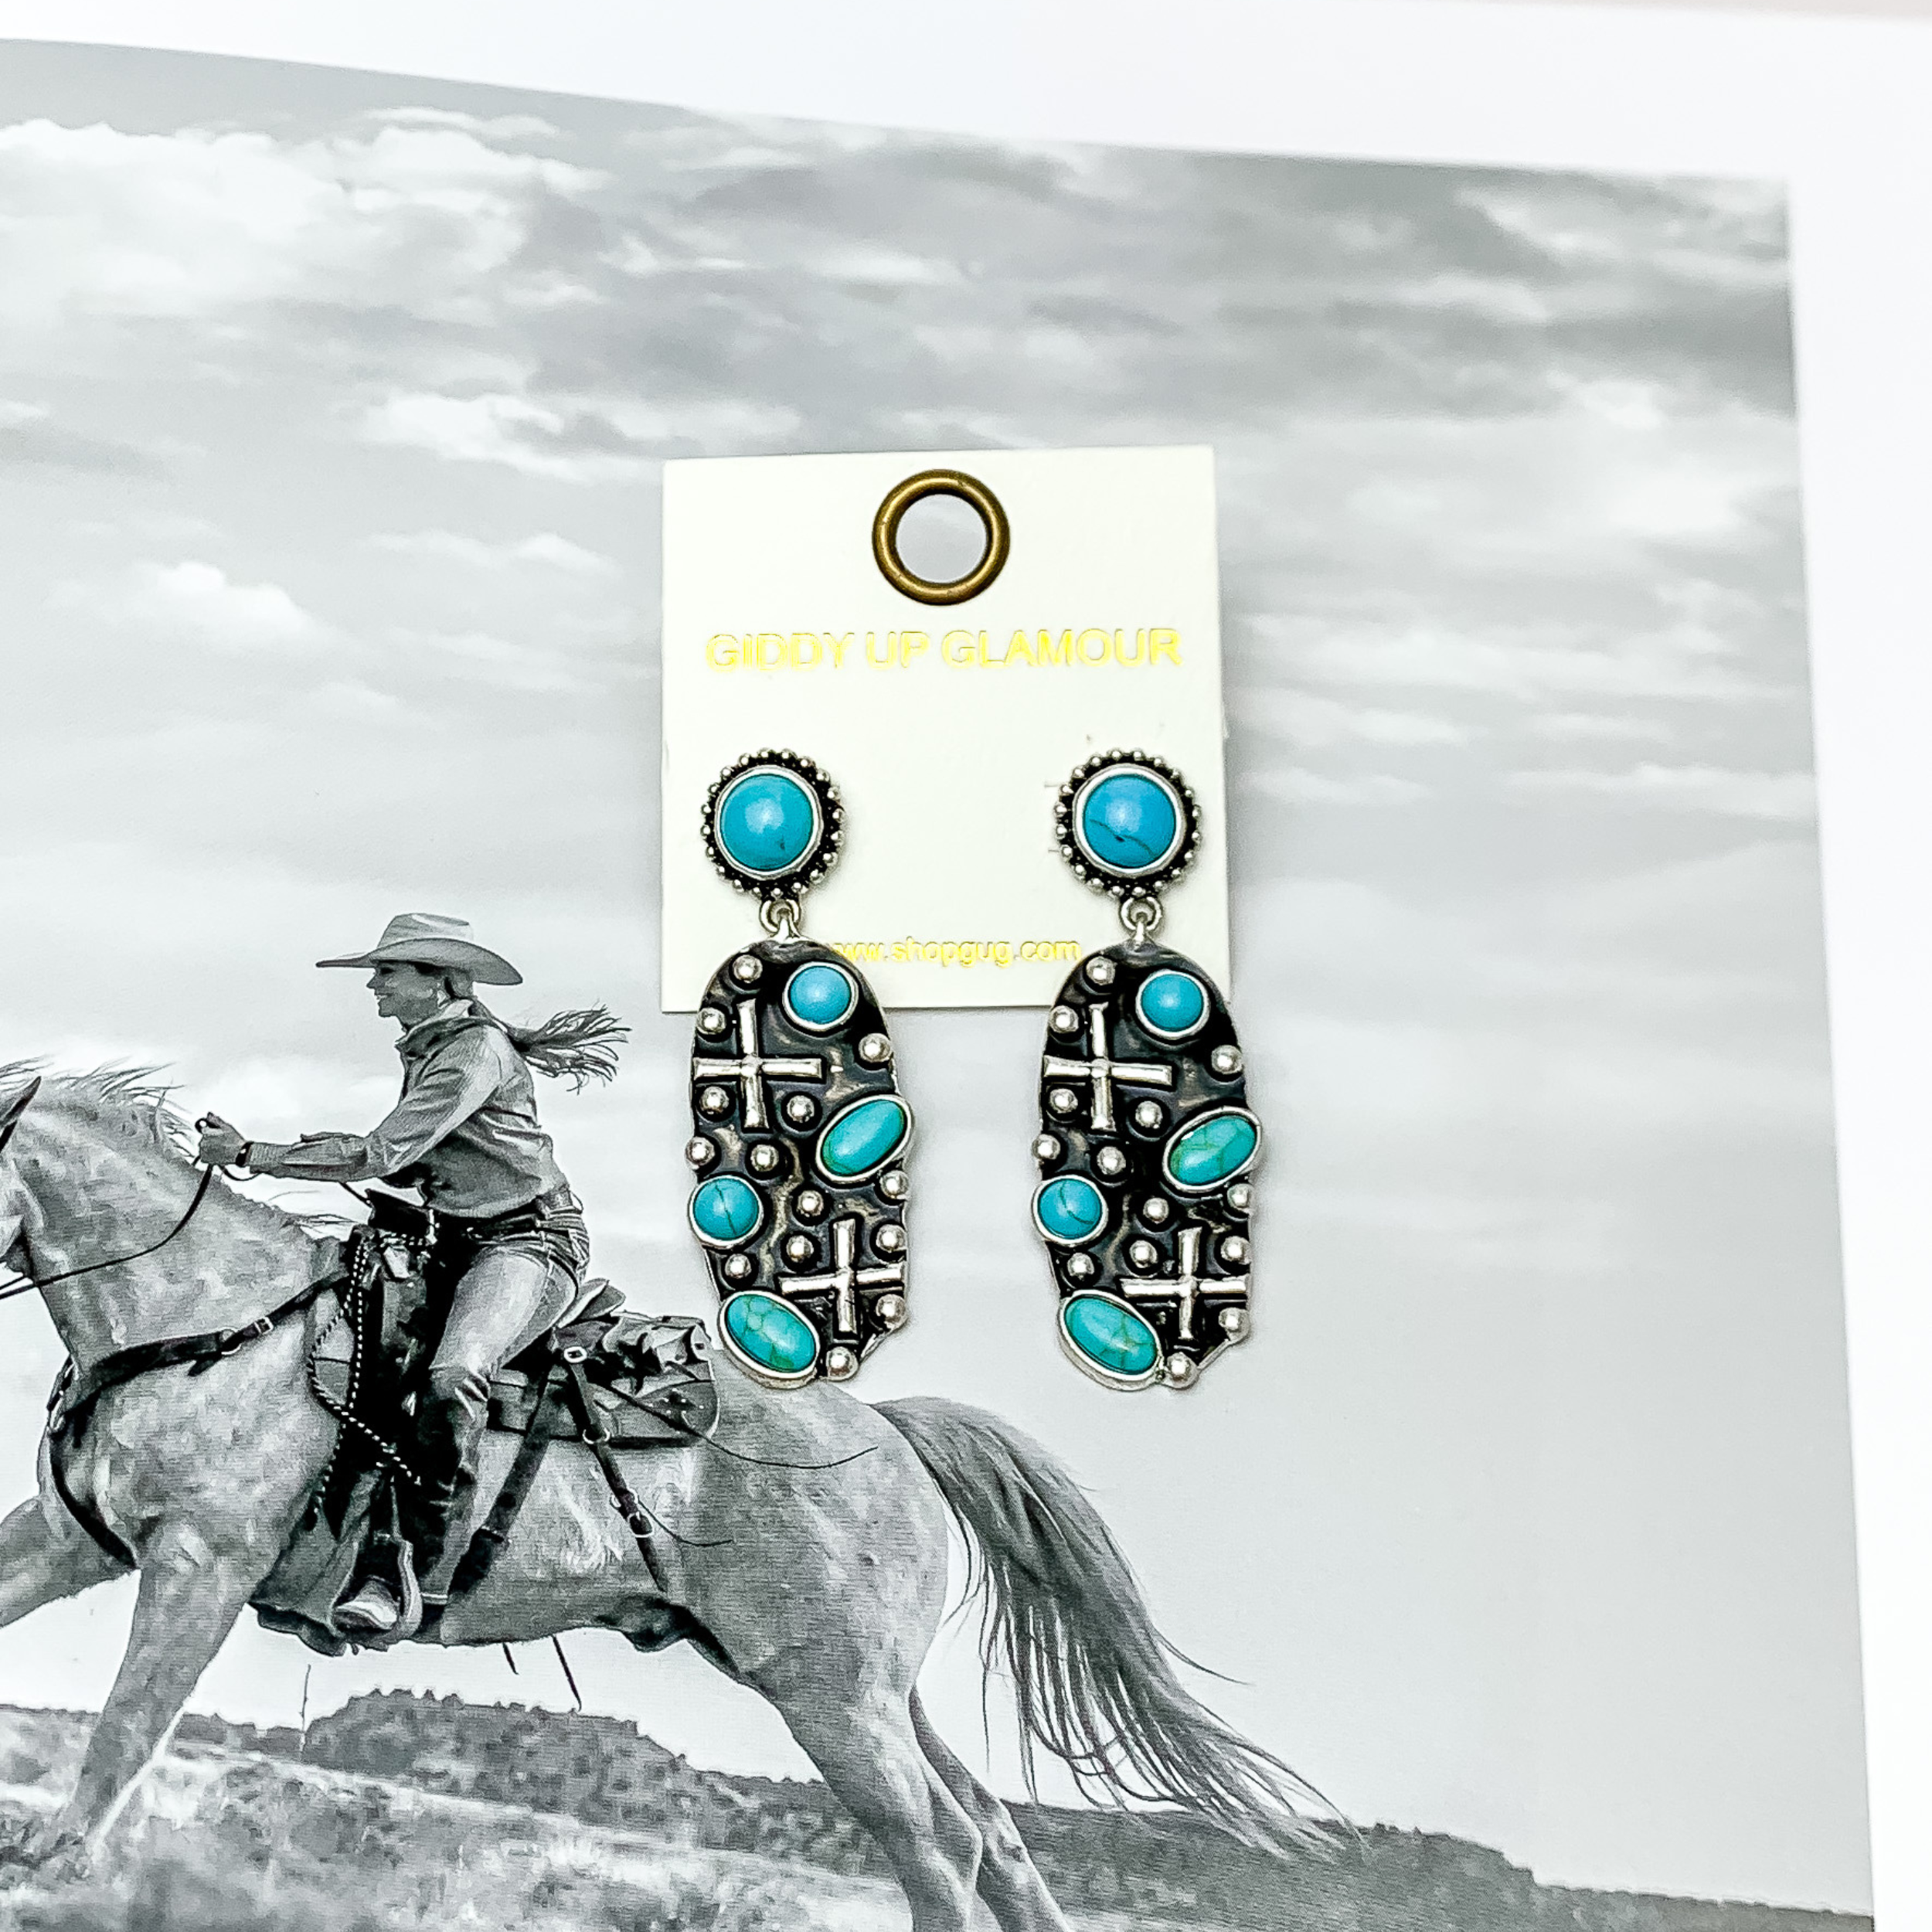 Western Silver Tone Designed Oval Earrings With Turquoise Stones. Pictured with a western scene in the background.